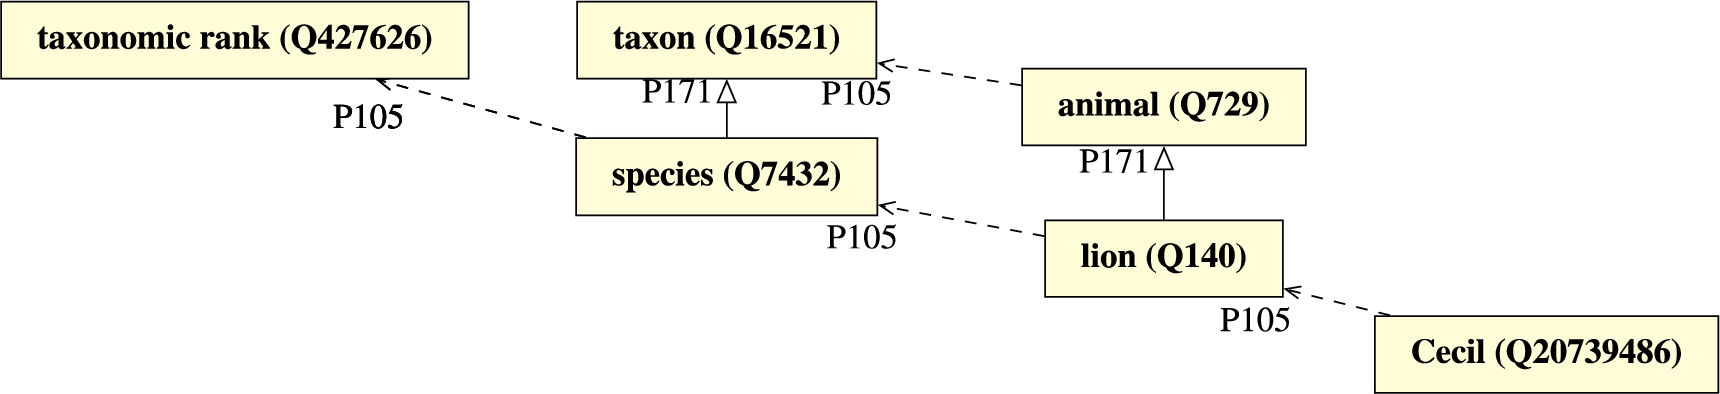 Four-levels of classification in the biological domain in Wikidata.